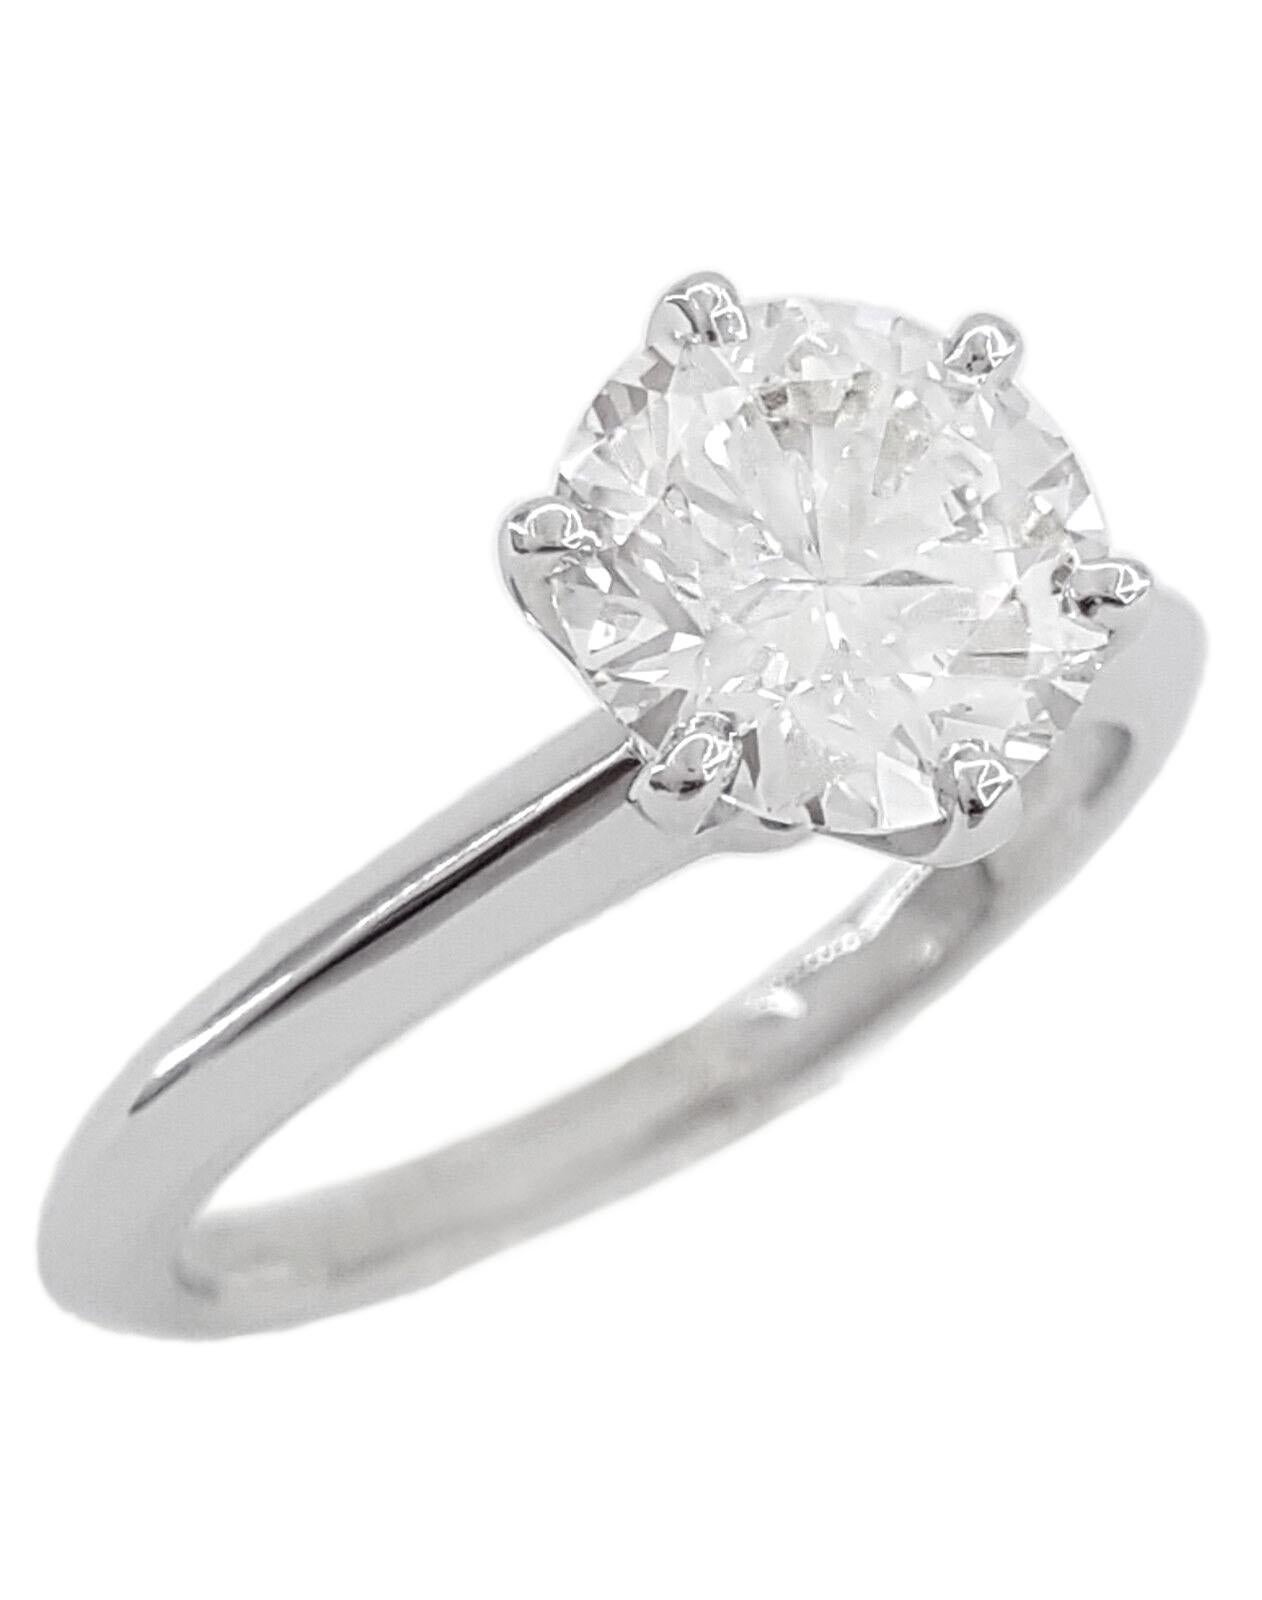 This exquisite ring showcases a GIA-certified 1.5-carat round diamond nestled gracefully in a stunning white gold setting. Graded by the esteemed Gemological Institute of America (GIA), the diamond boasts an exceptional f color grade, signifying a